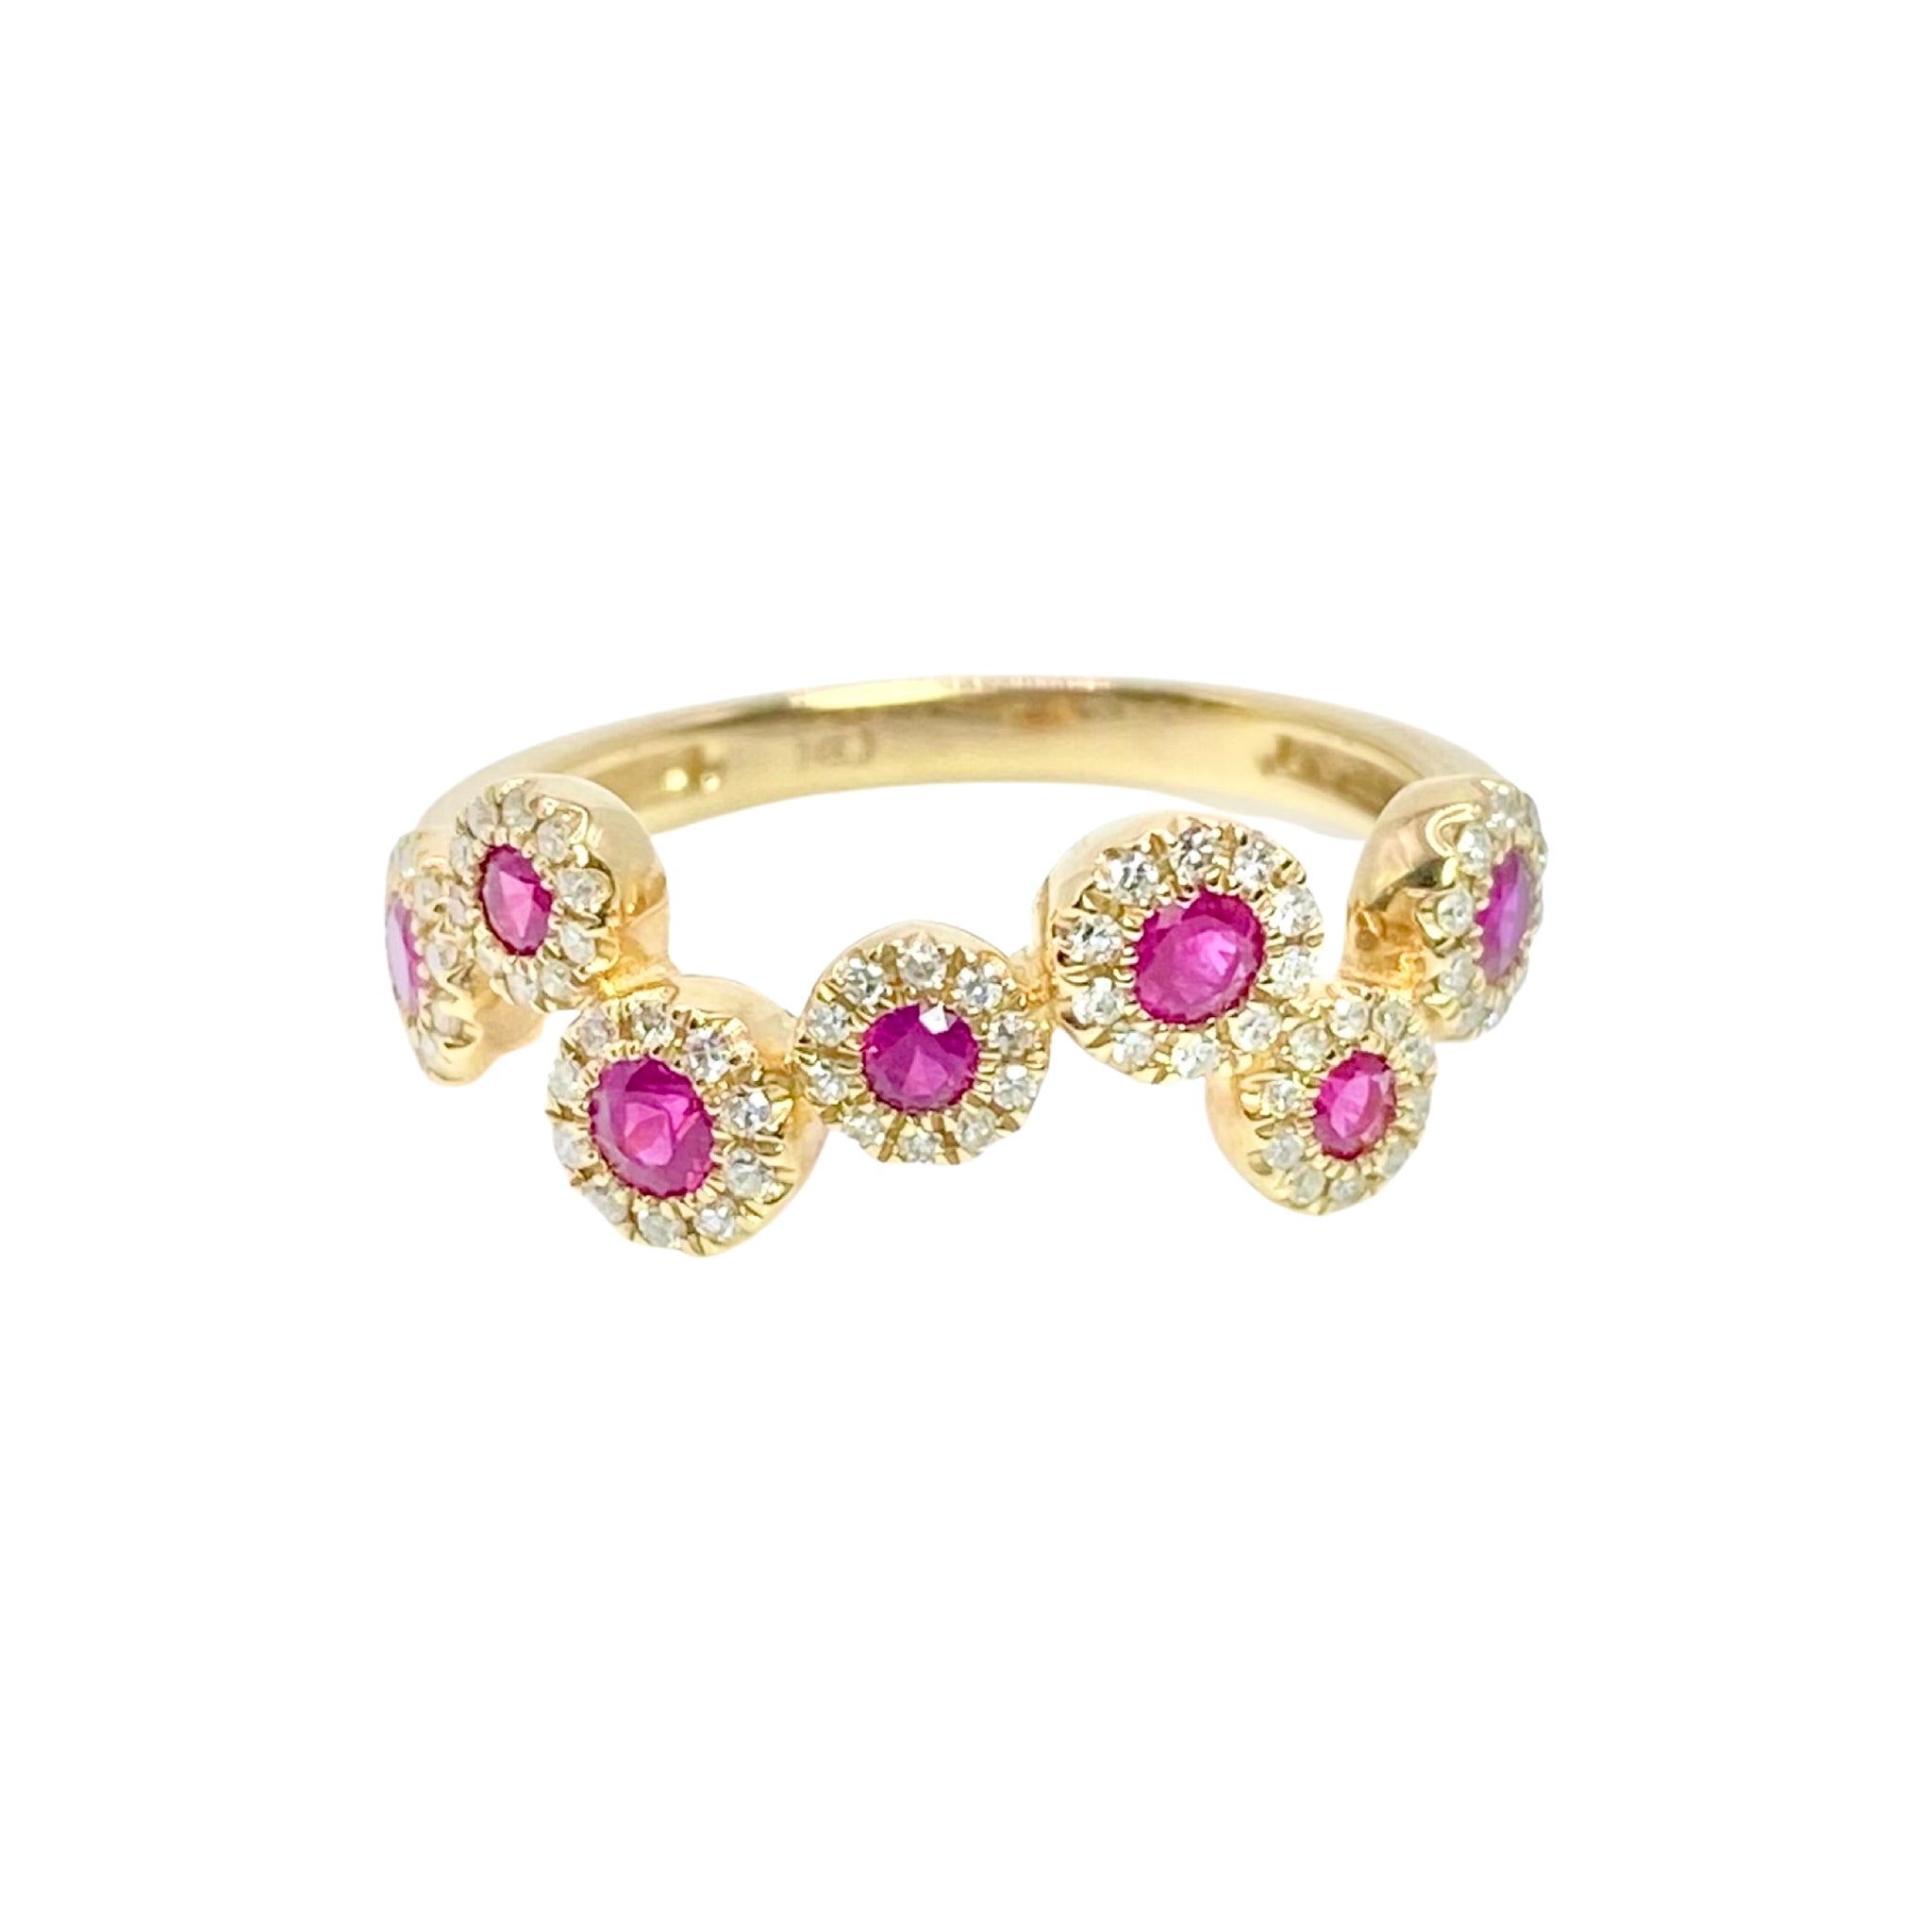 Confetti Ruby & Diamond Ring Available at Shaylula Jewlery & Gifts in Tarrytown, NY and online. This playful ring features rubies surrounded by a halo of white diamonds set in 14k yellow gold.  • 14k, .23 ct dia, .41 ct ruby  • Size